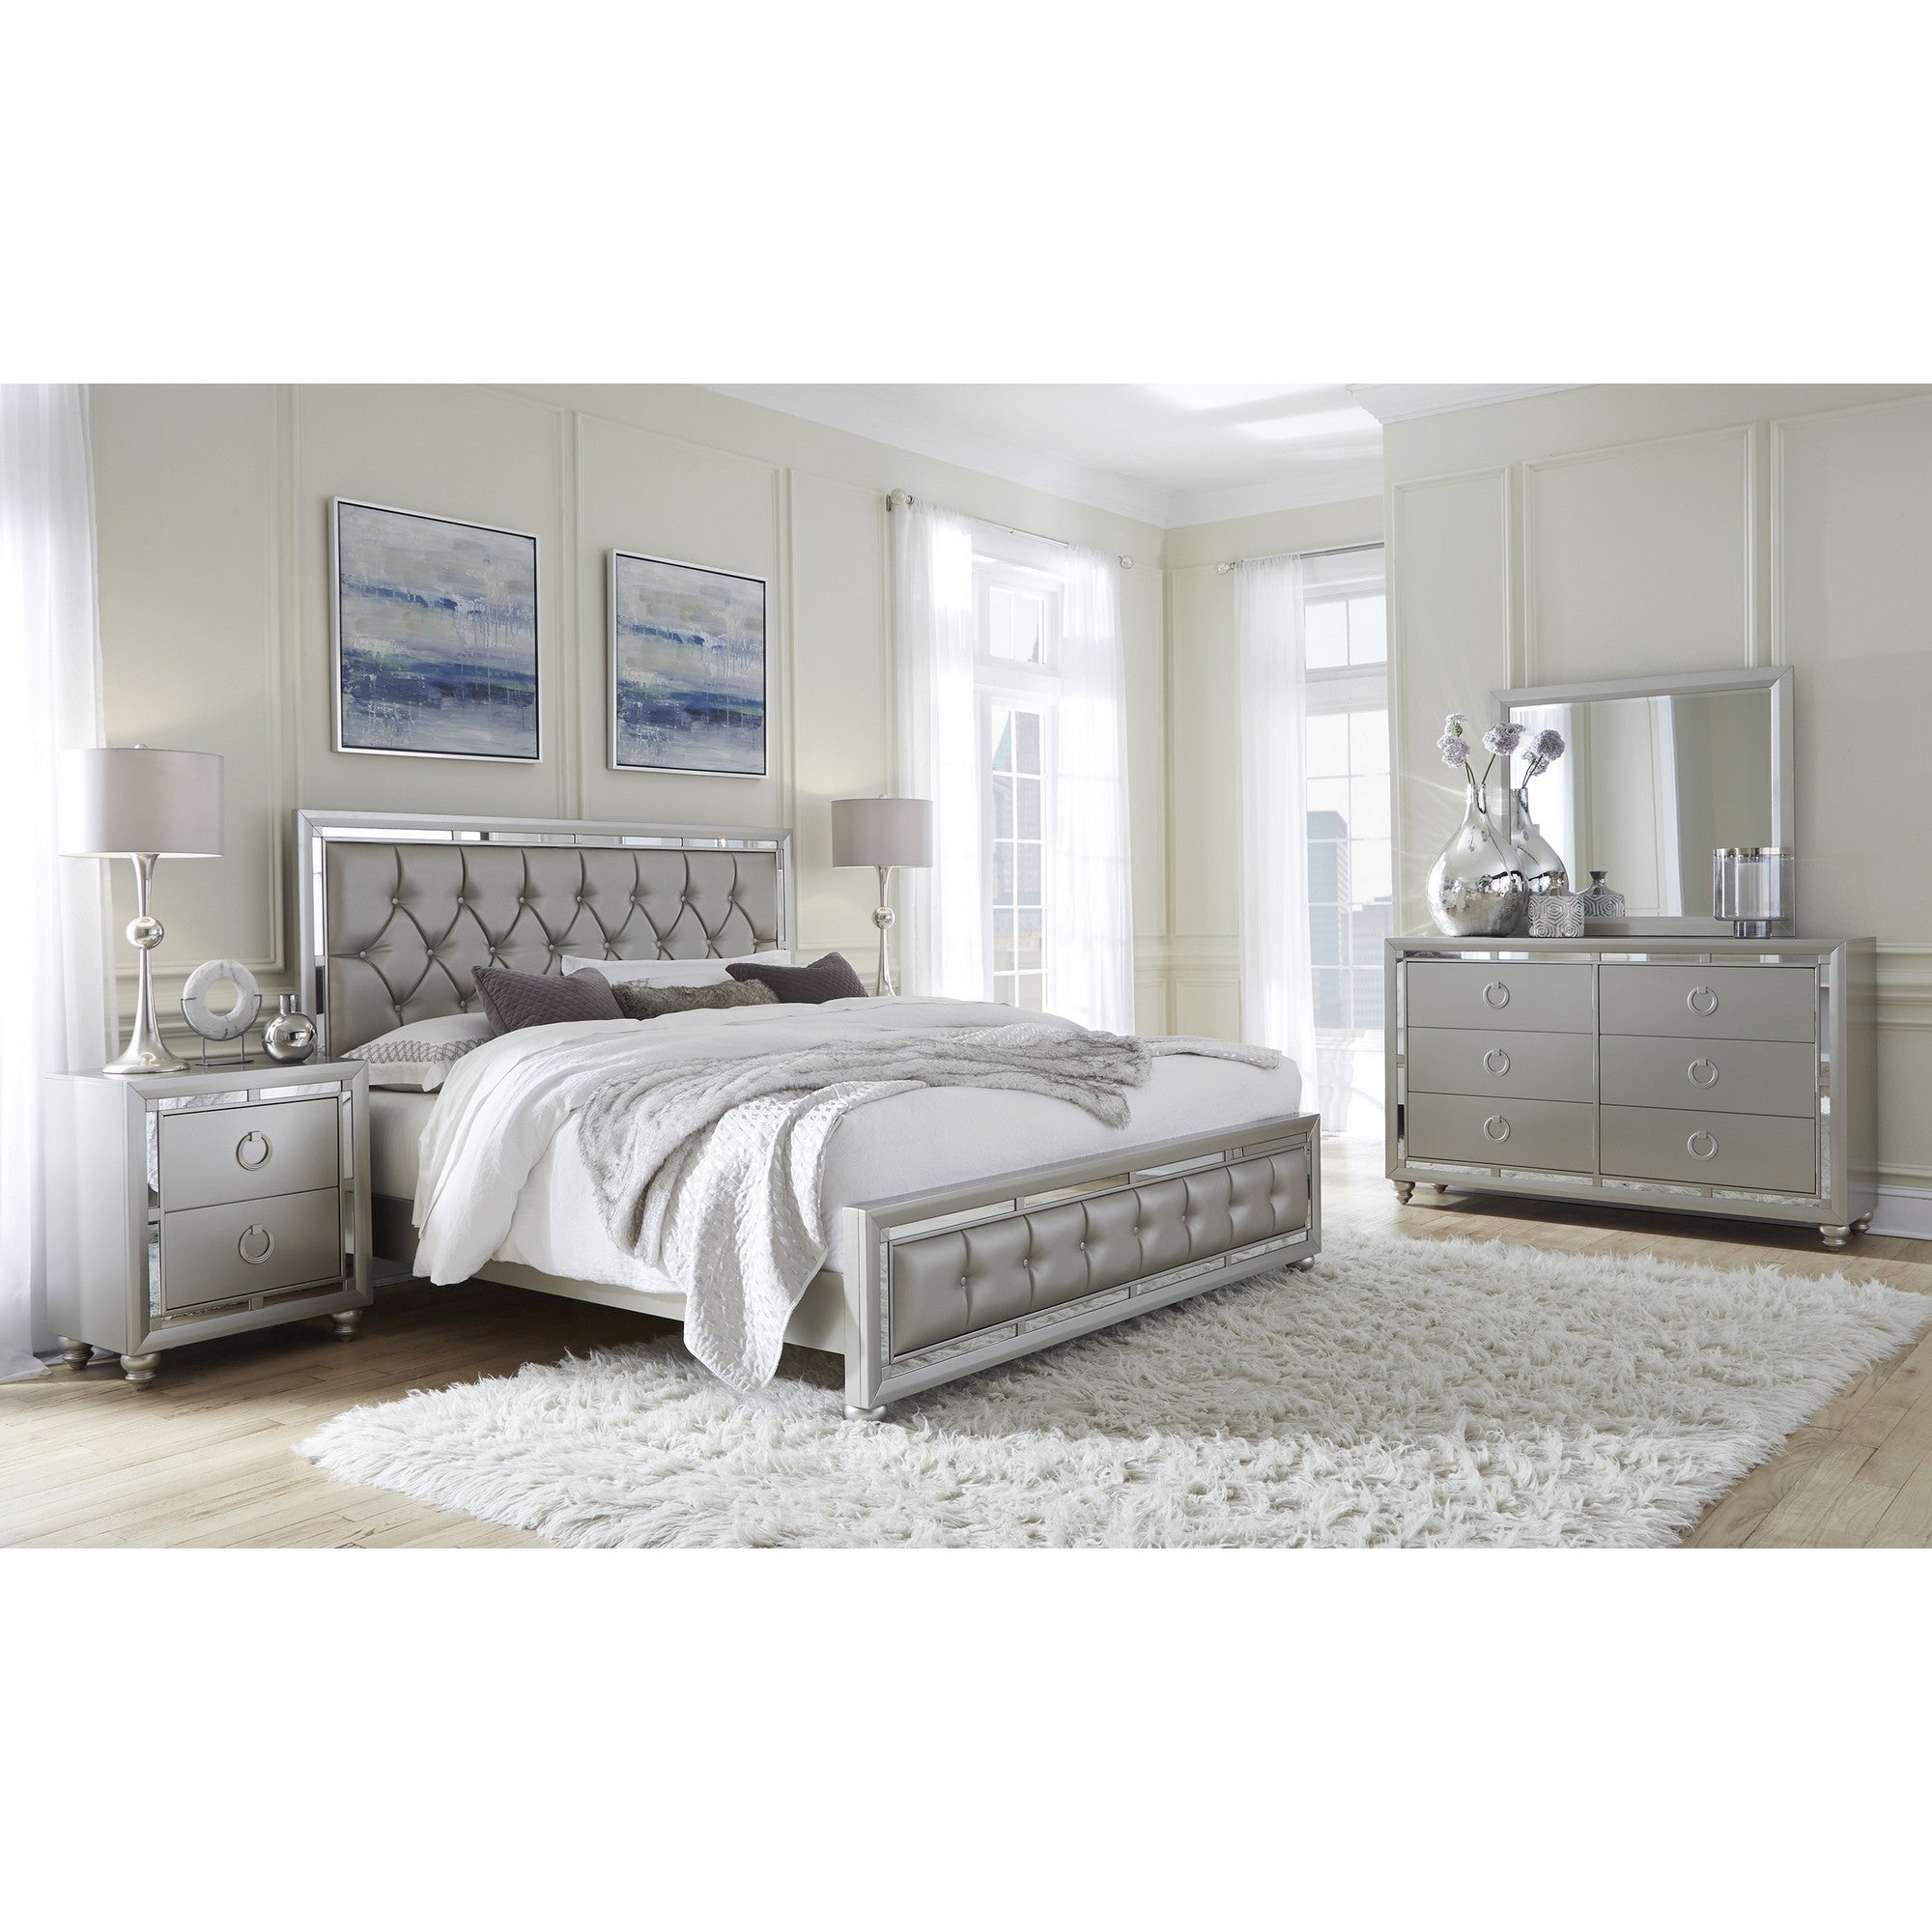 Silver Champagne Tone Queen Bed  Padded Headboard  Padded Footboard  Mirror Trim Accents Default Title